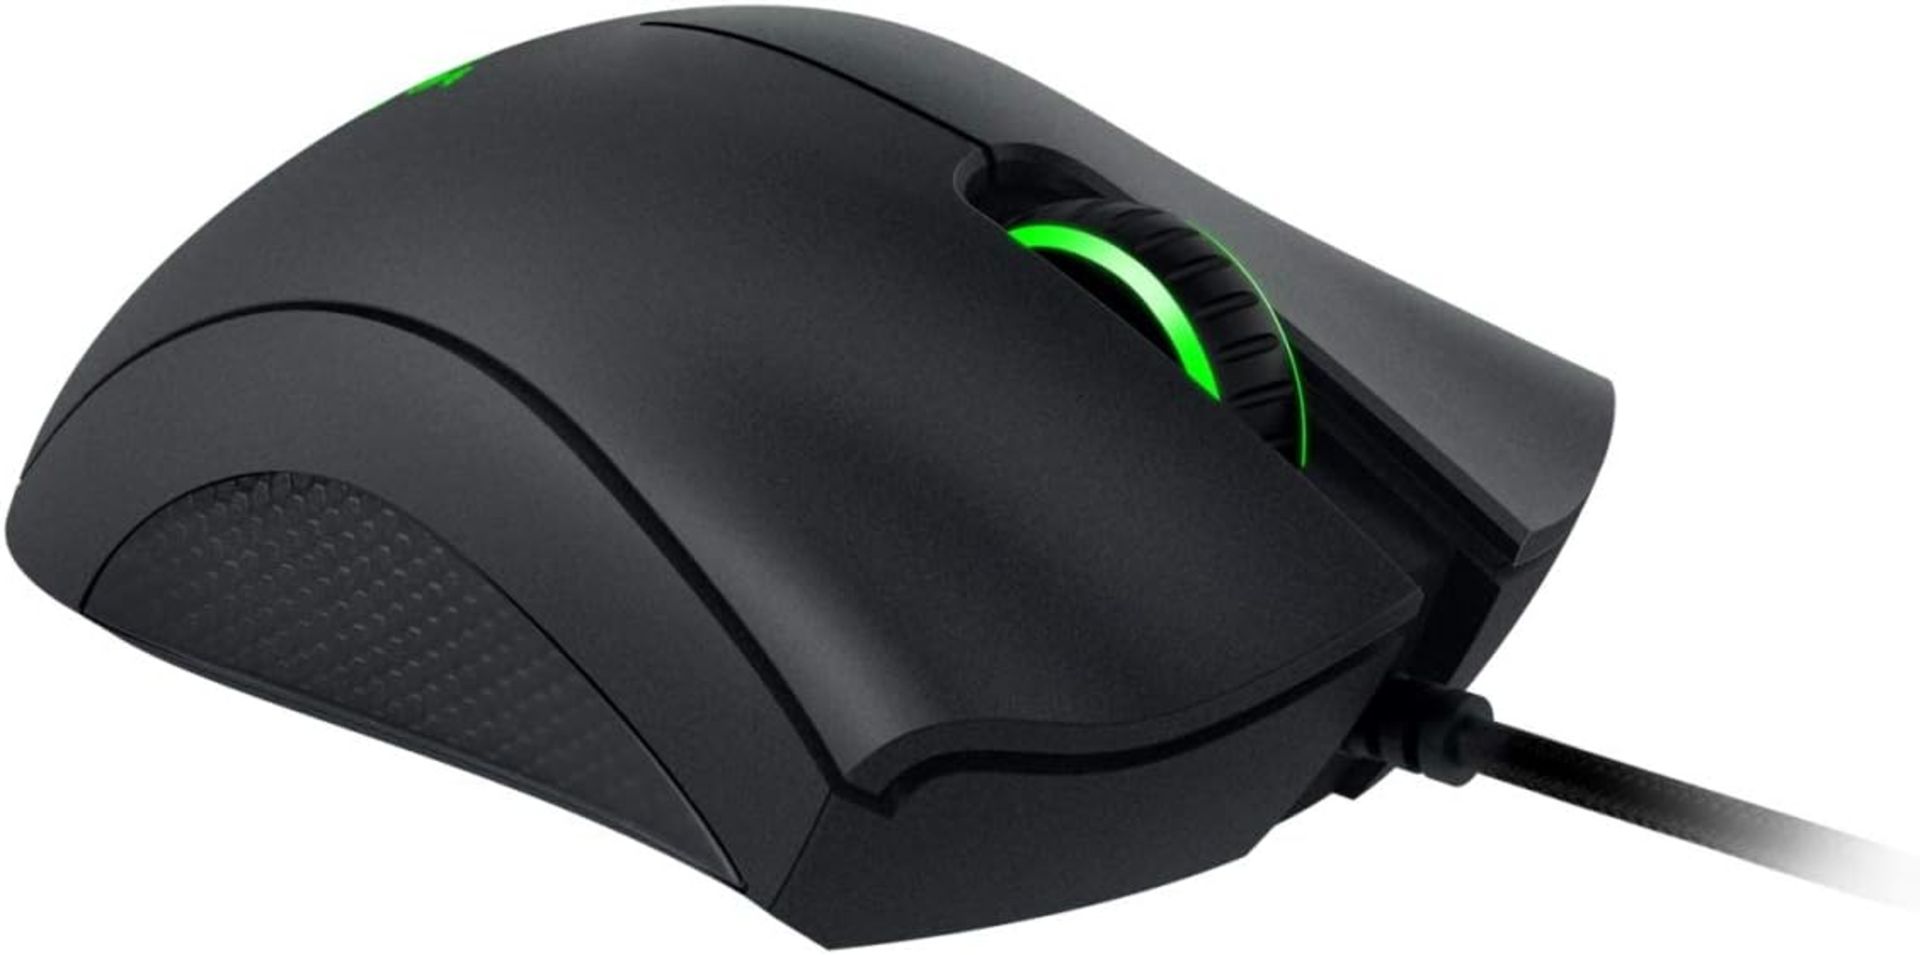 4x BRAND NEW FACTORY SEALED RAZER Deathadder Essential Gaming Mouse. RRP £22.99 EACH. The Razer - Image 3 of 5